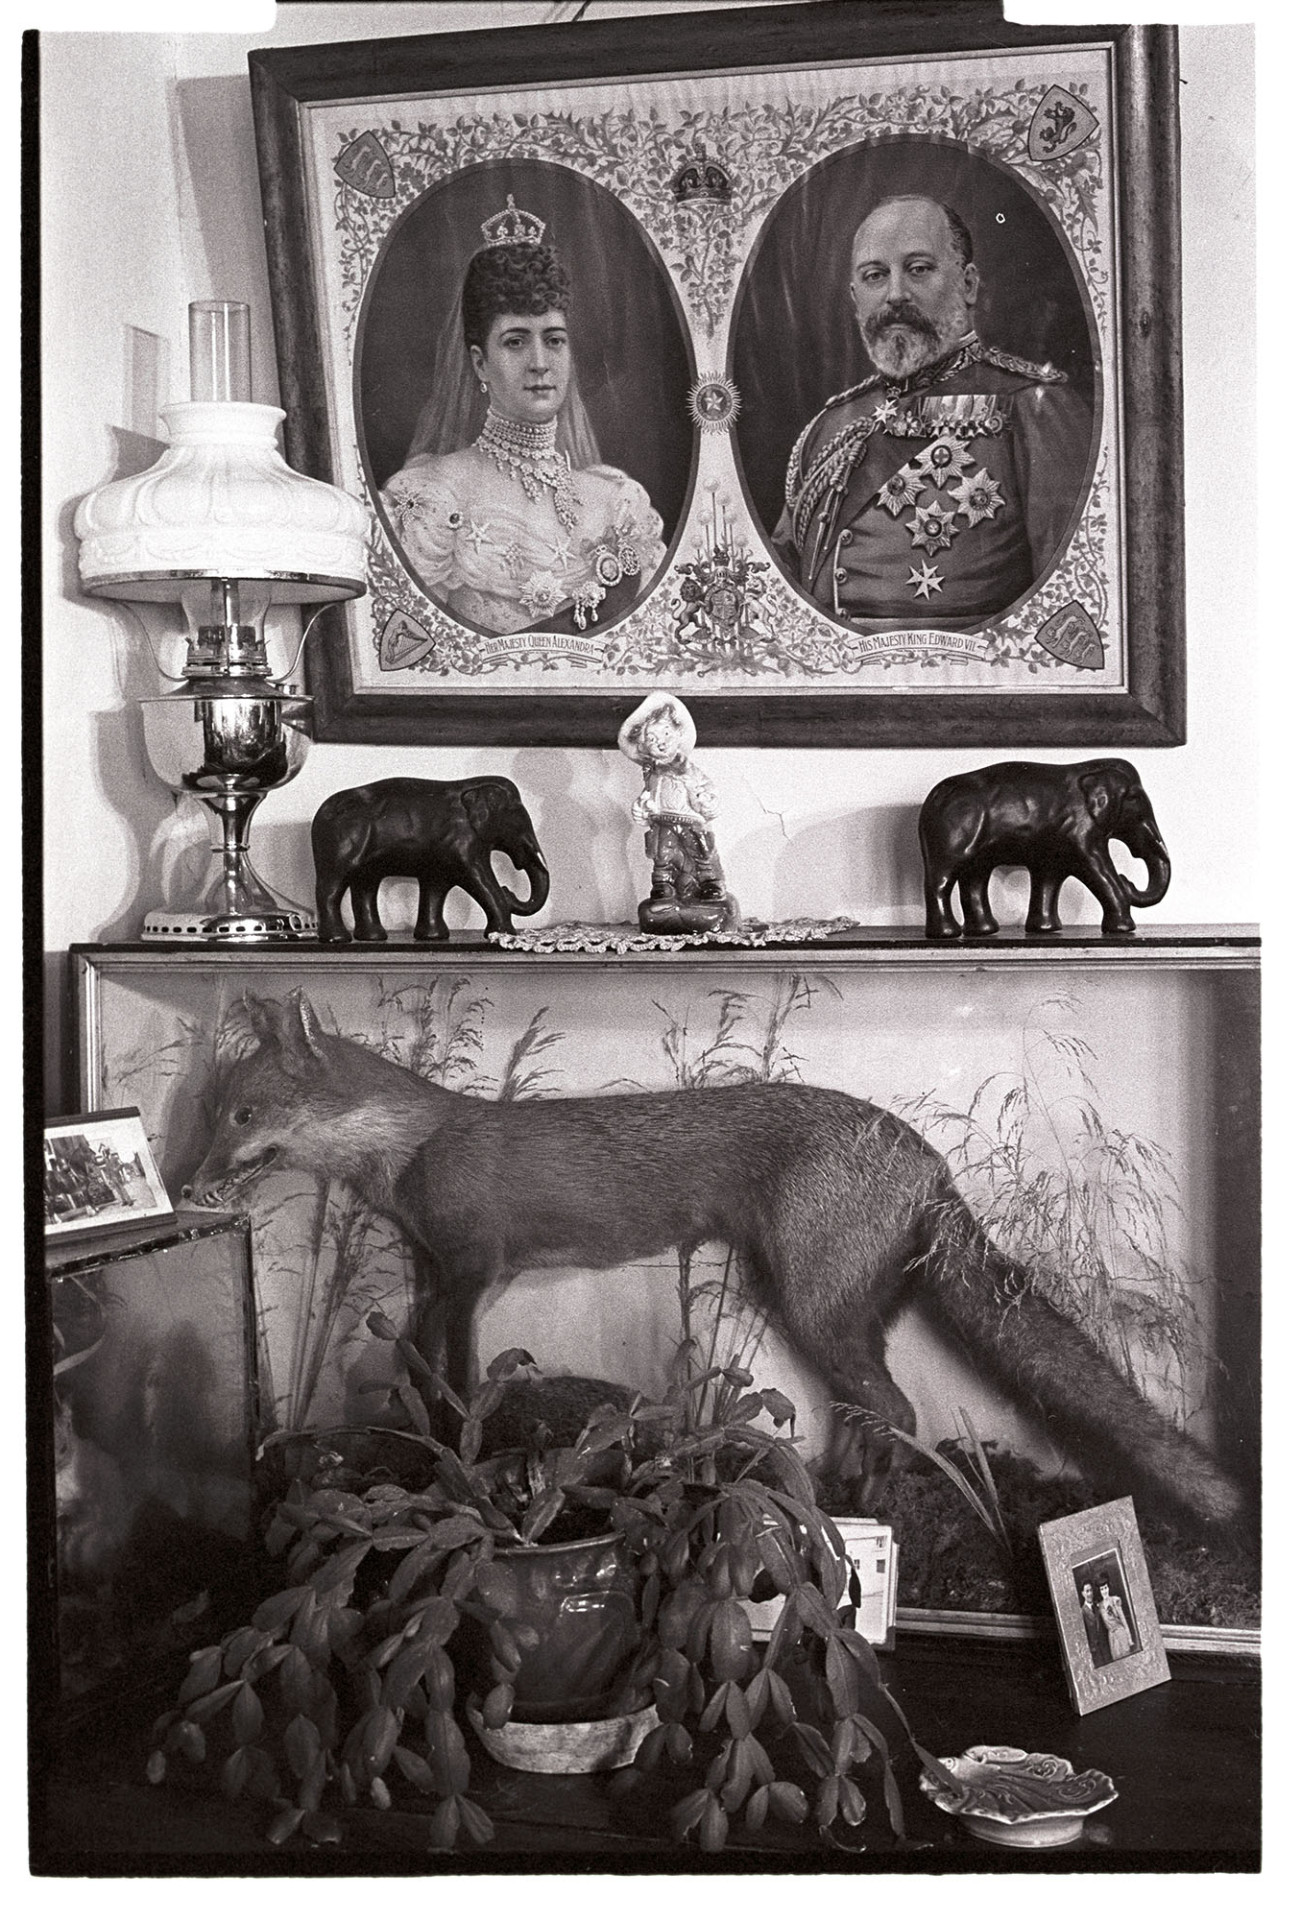 Interior with stuffed fox, lamp and Royal portrait, ornaments. 
[A display with a stuffed fox, elephant ornaments, pot plant, lamp and picture of King Edward VII and Queen Alexandra in the parlour at Deckport Farm, Hatherleigh.]